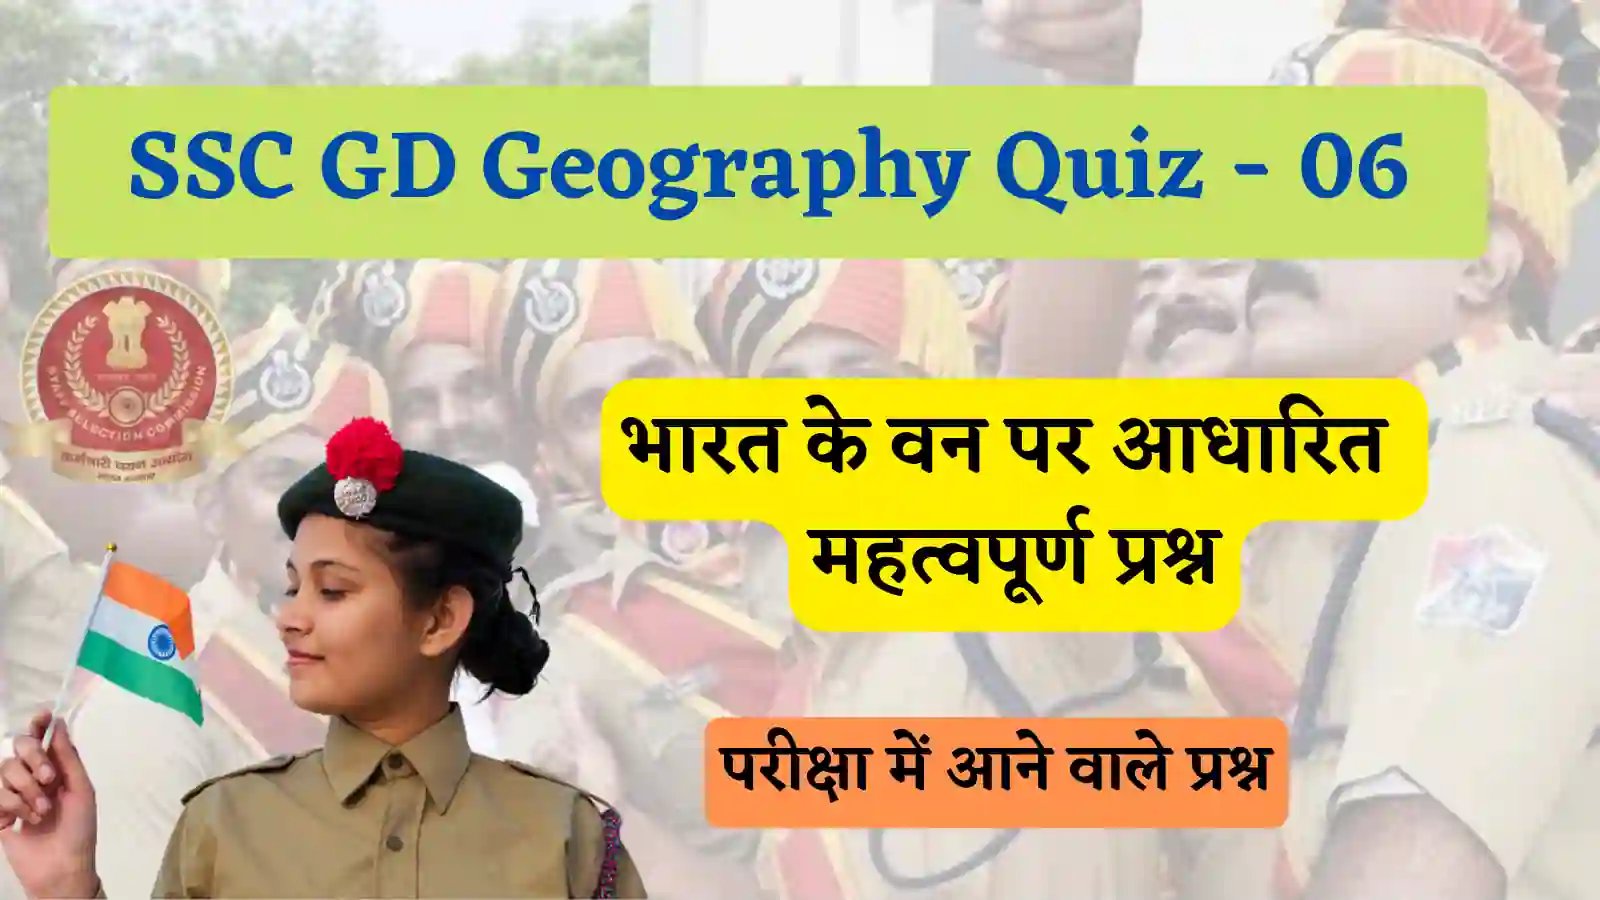 SSC GD Geography Quiz - 06